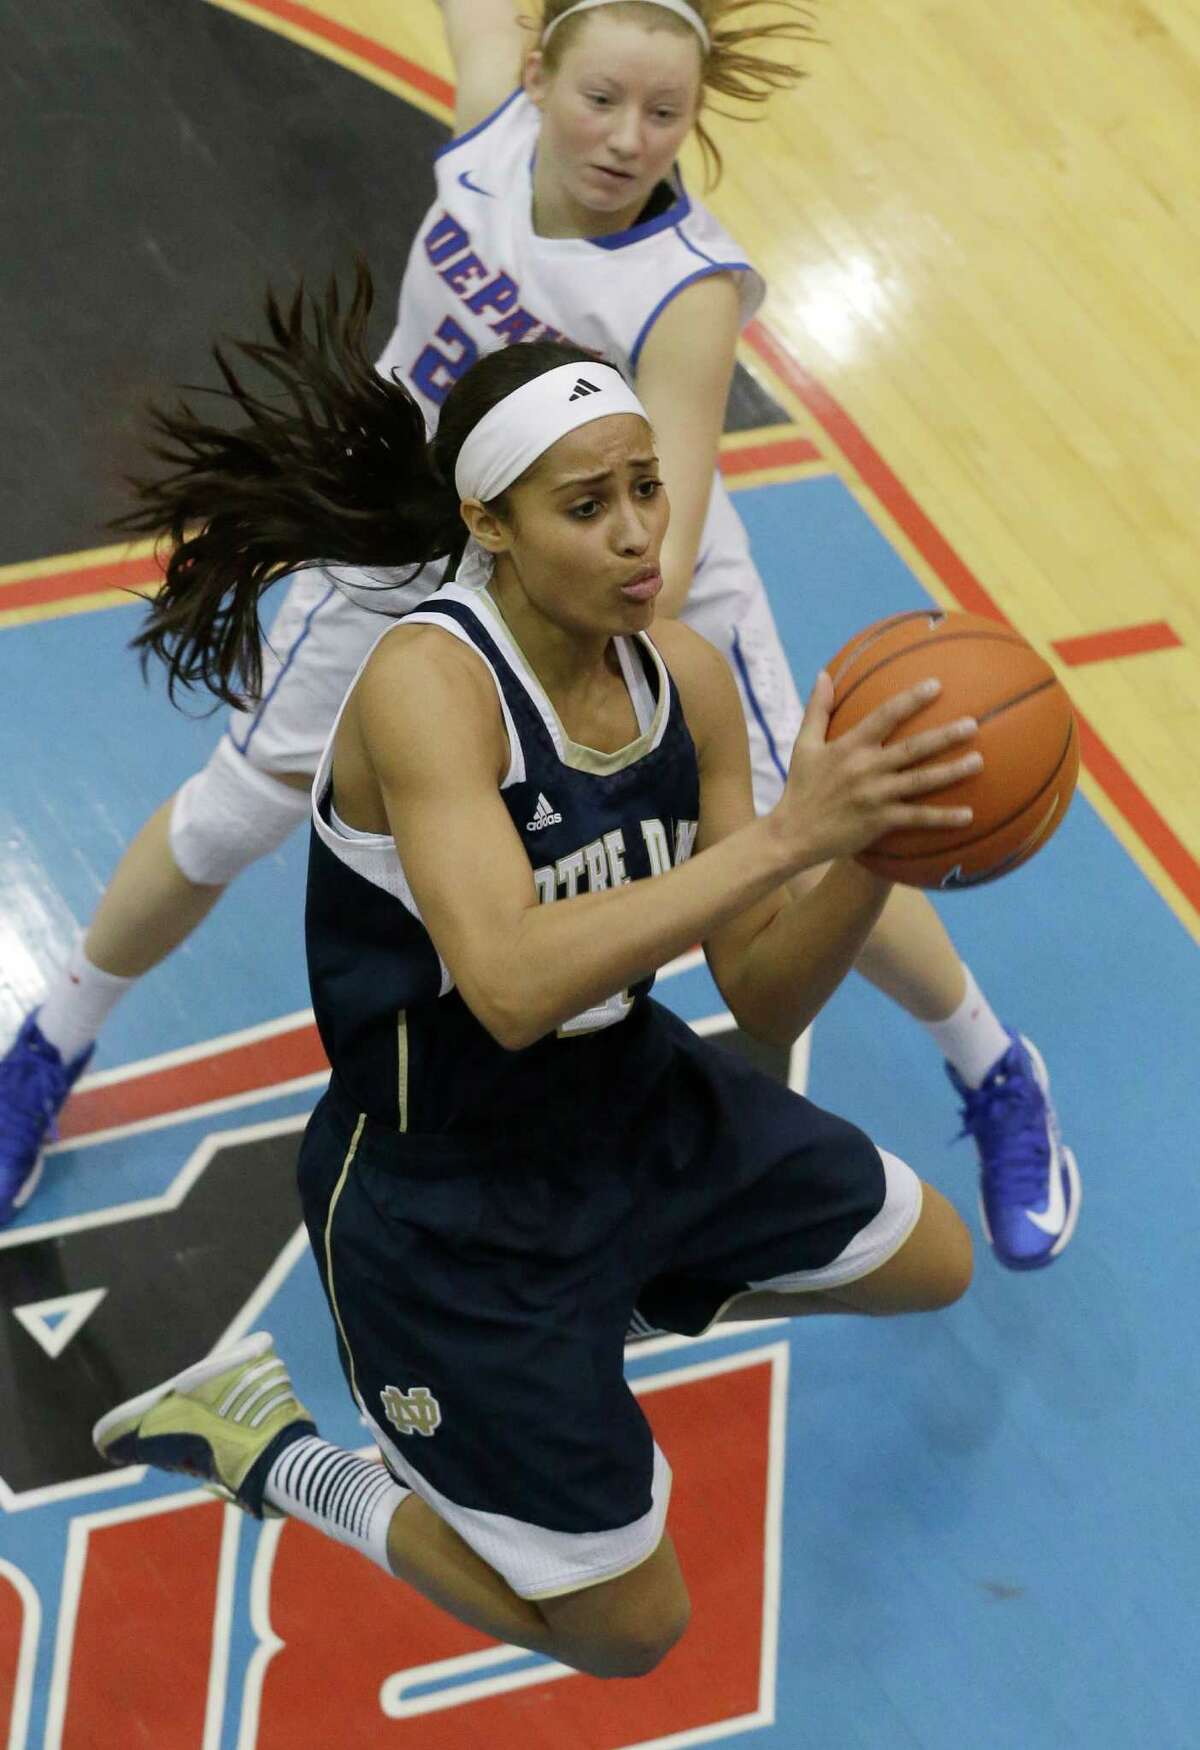 Notre Dame guard Skylar Diggins (4) drives to the basket past DePaul guard Megan Rogowski (21) during the second half of an NCAA women's college basketball game in Chicago on Sunday, Feb. 24, 2013 .Notre Dame won 84-56. (AP Photo/Nam Y. Huh)